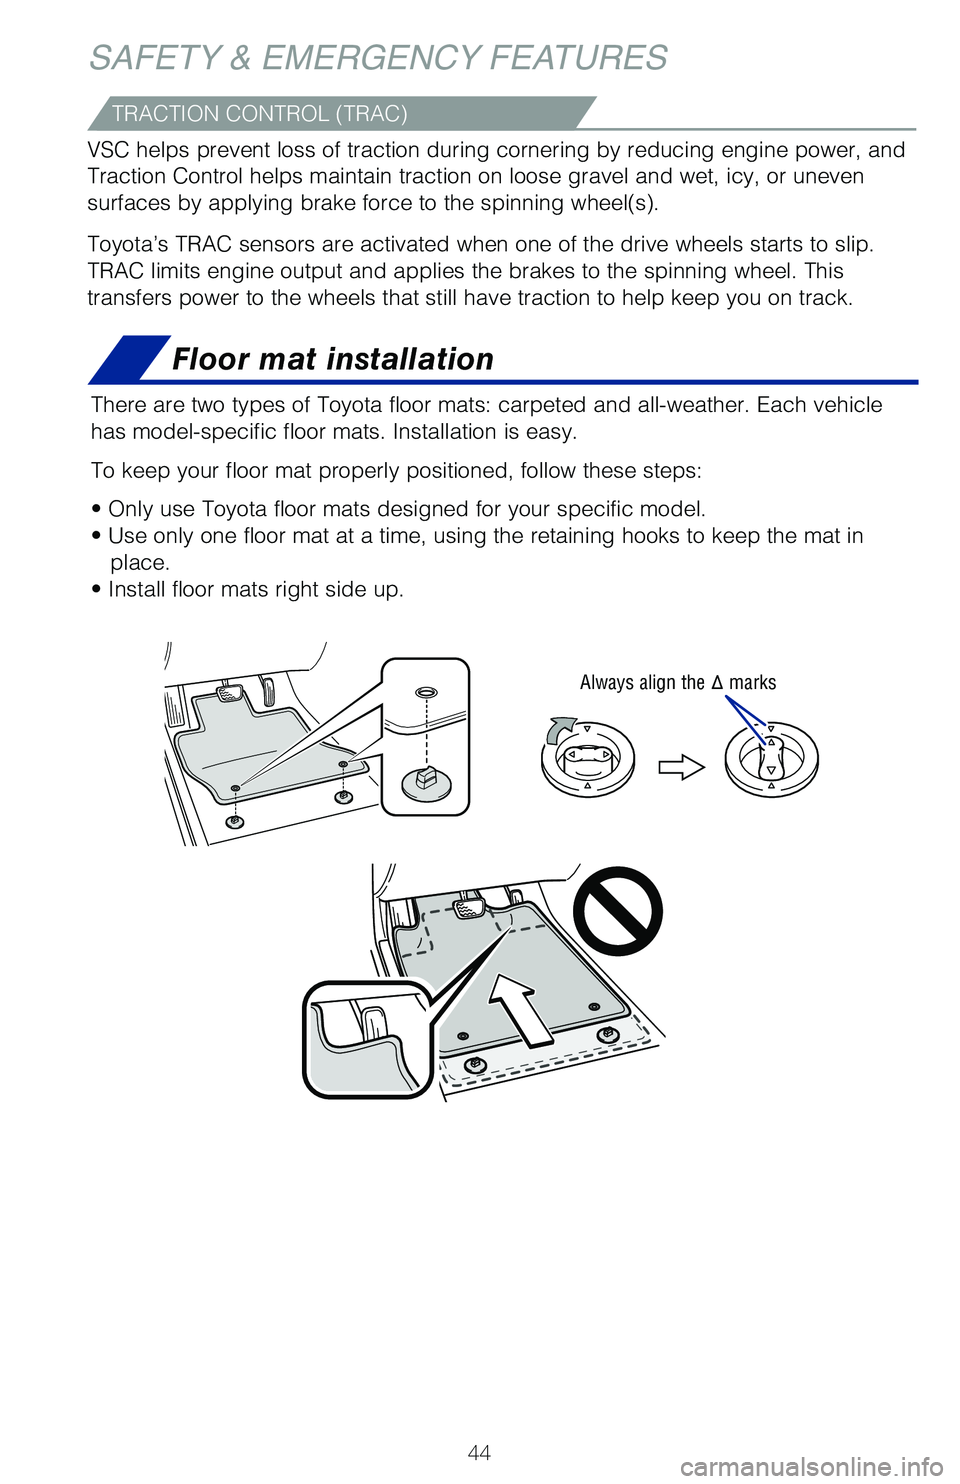 TOYOTA AVALON HYBRID 2020  Owners Manual (in English) 44
Floor mat installation
There are two types of Toyota floor mats: carpeted and all-weather. Each\
 vehicle 
has model-specific floor mats. Installation is easy. 
To keep your floor mat properly posi